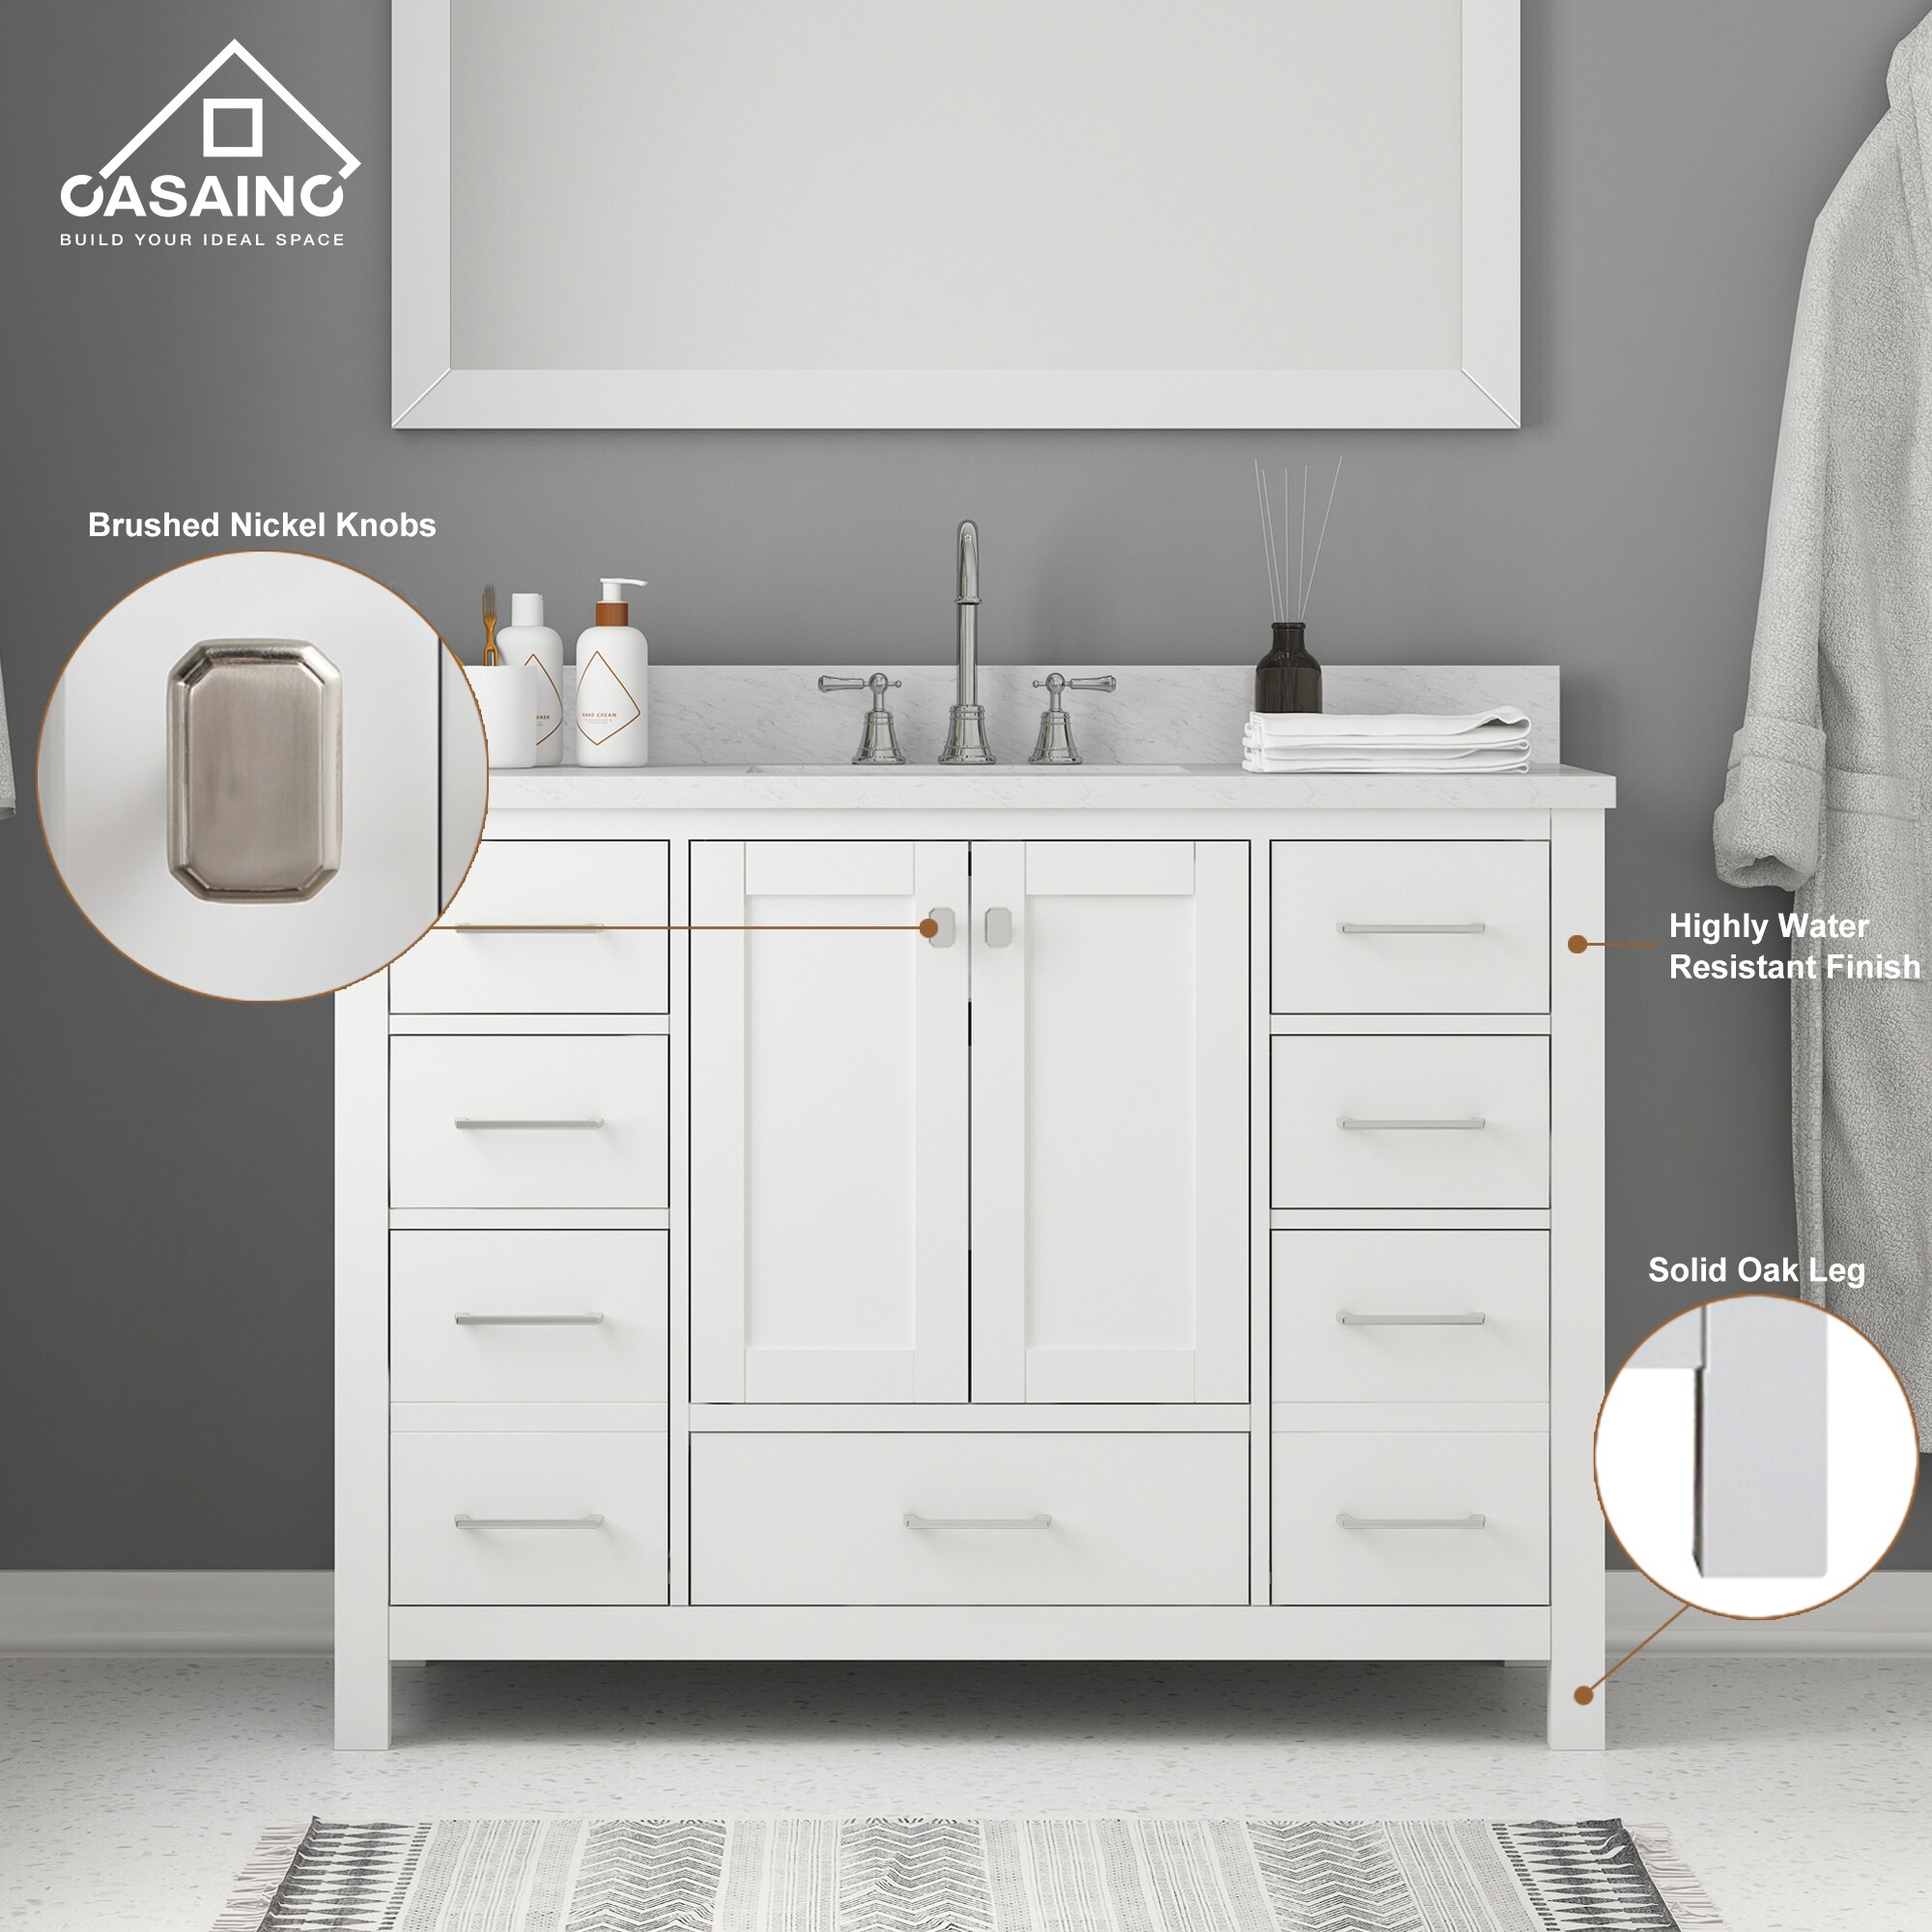 Casainc 48 In White Undermount Single Sink Bathroom Vanity With White Marble Top In The Bathroom 9846